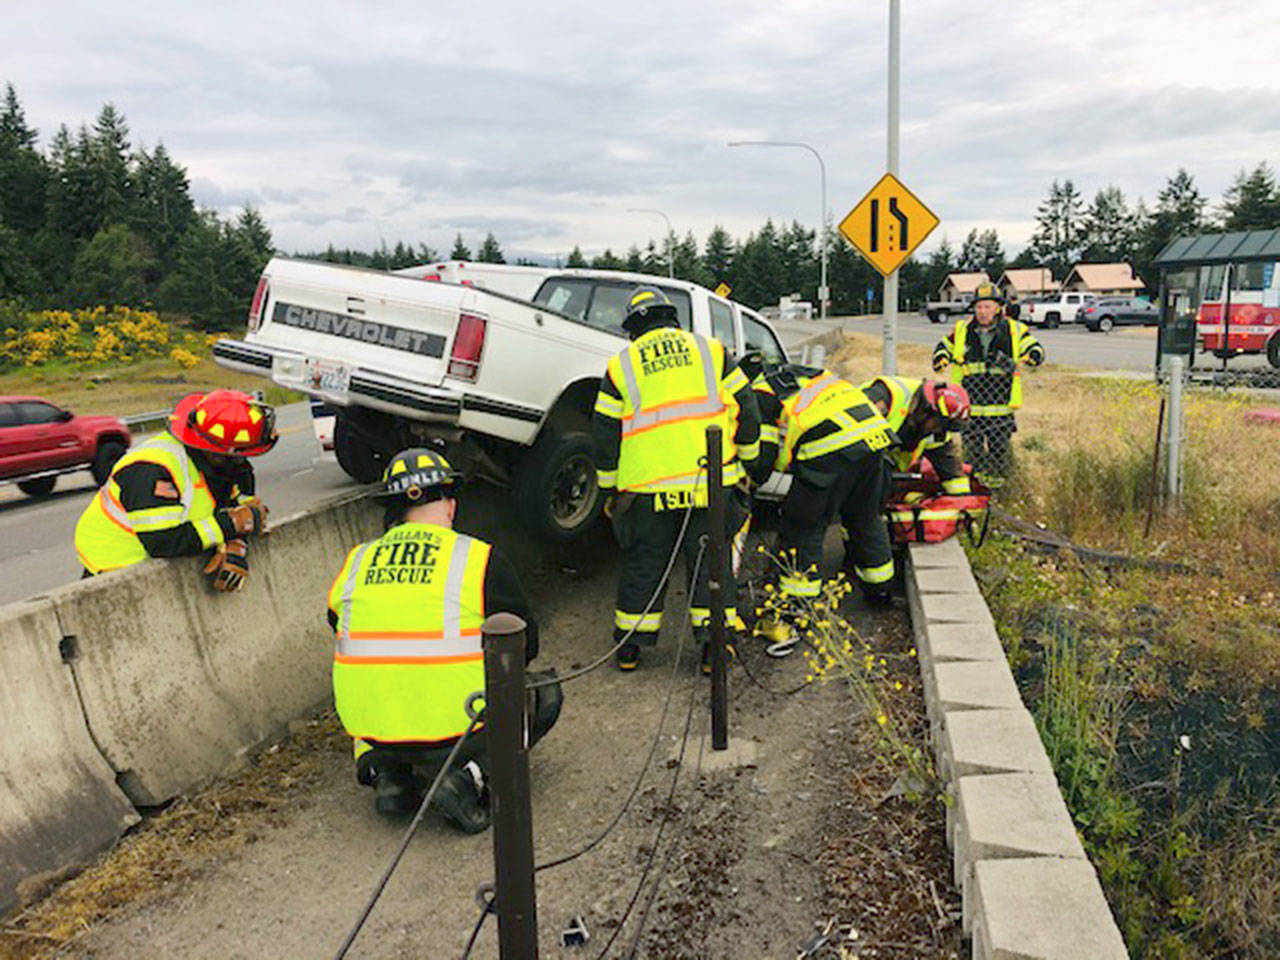 Crews from Clallam County Fire District 2 respond to a single-vehicle accident at the scenic overlook located just west of Deer Park Road on U.S. Highway 101 east of Port Angeles on Monday night. A 25-year-old Port Angeles man failed to negotiate the curve and collided with a concrete barrier located on the north side of the roadway. The driver was booked in the Clallam County Jail on DUI charges. (Clallam County Fire District 2)